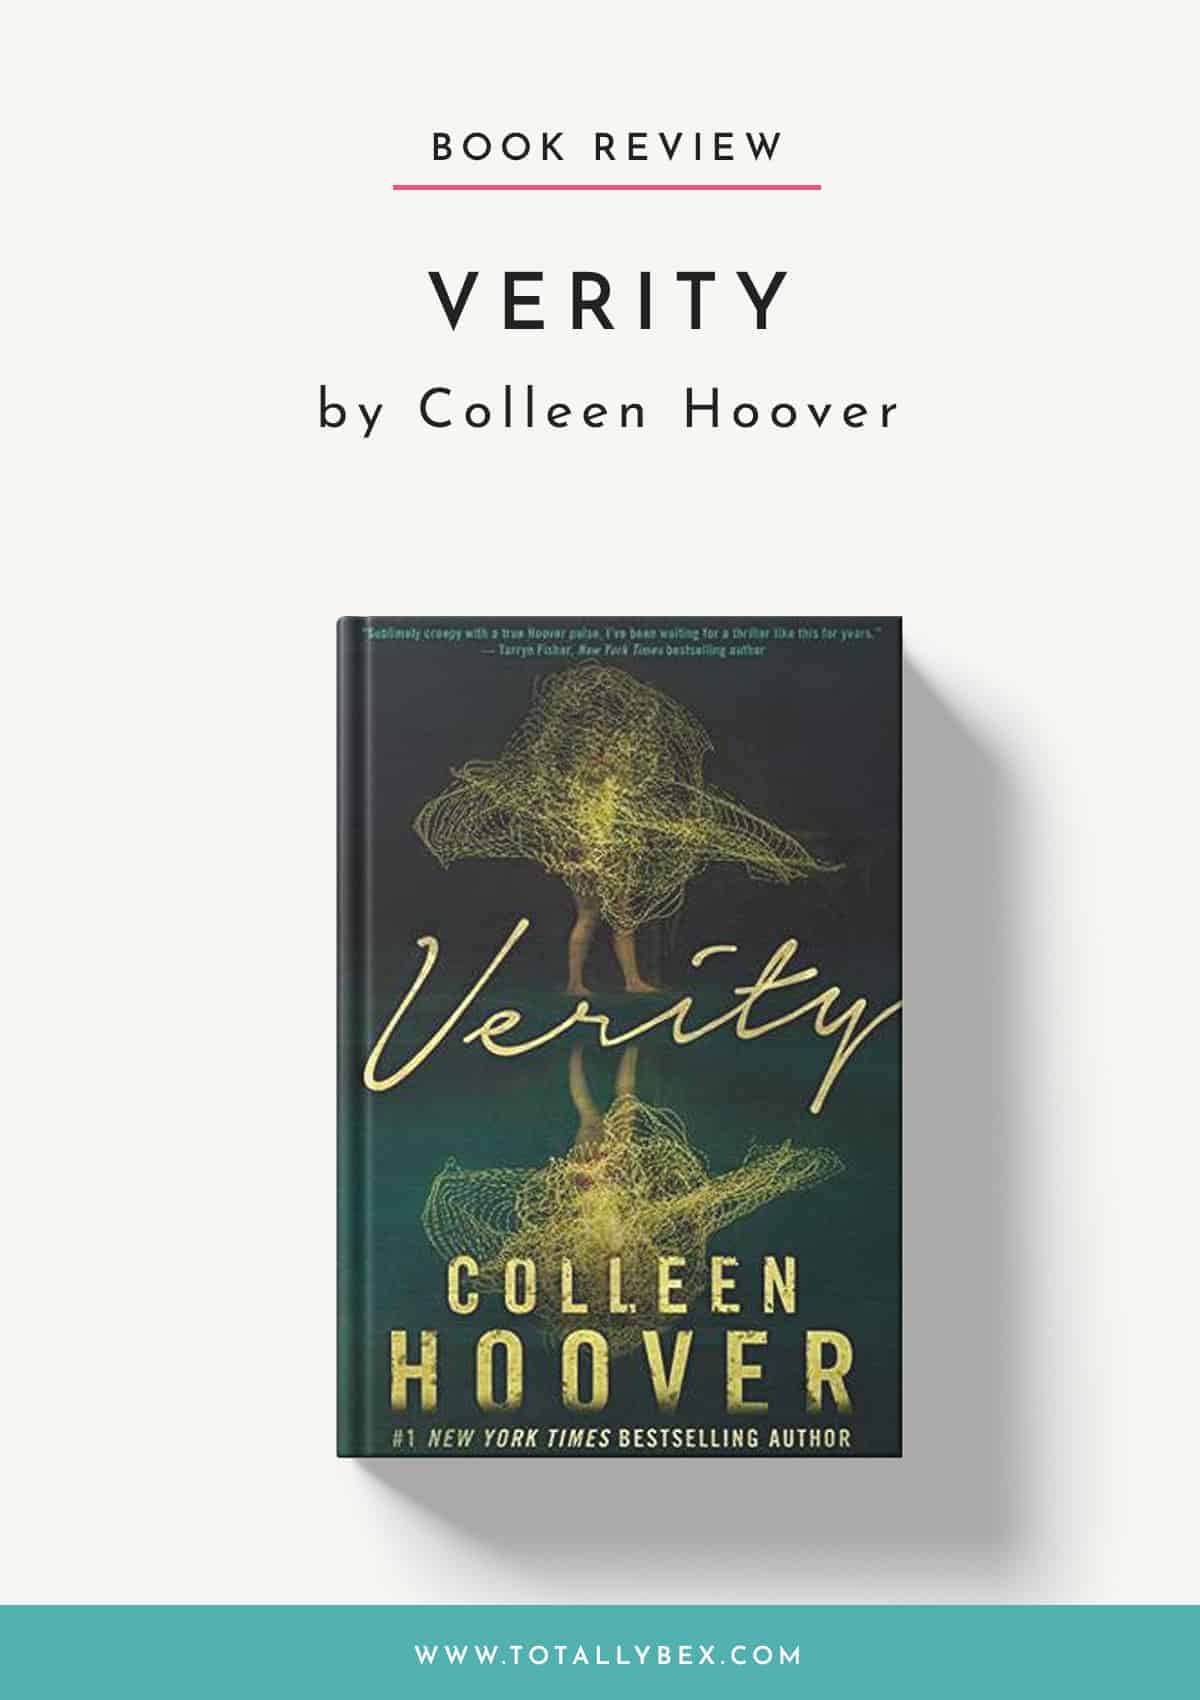 Verity by Colleen Hoover-Book Review